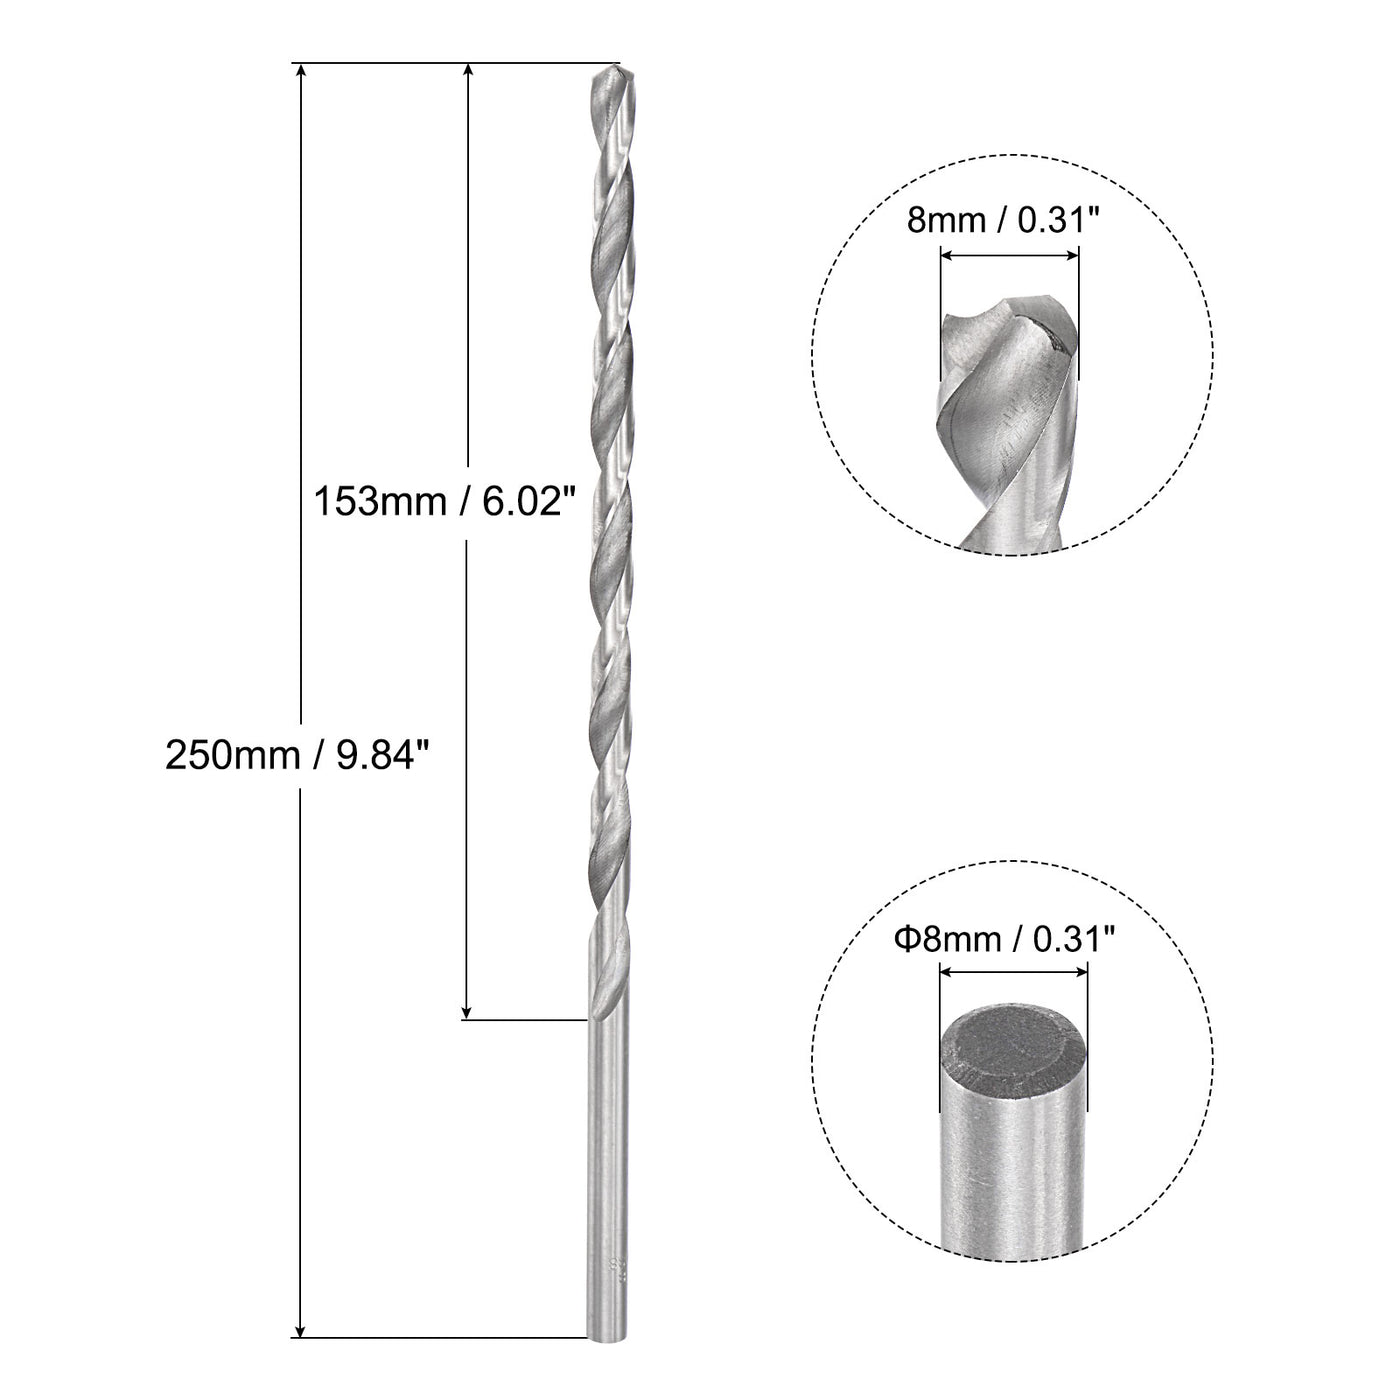 uxcell Uxcell 8mm Twist Drill Bits, High-Speed Steel Extra Long Drill Bit 250mm Length